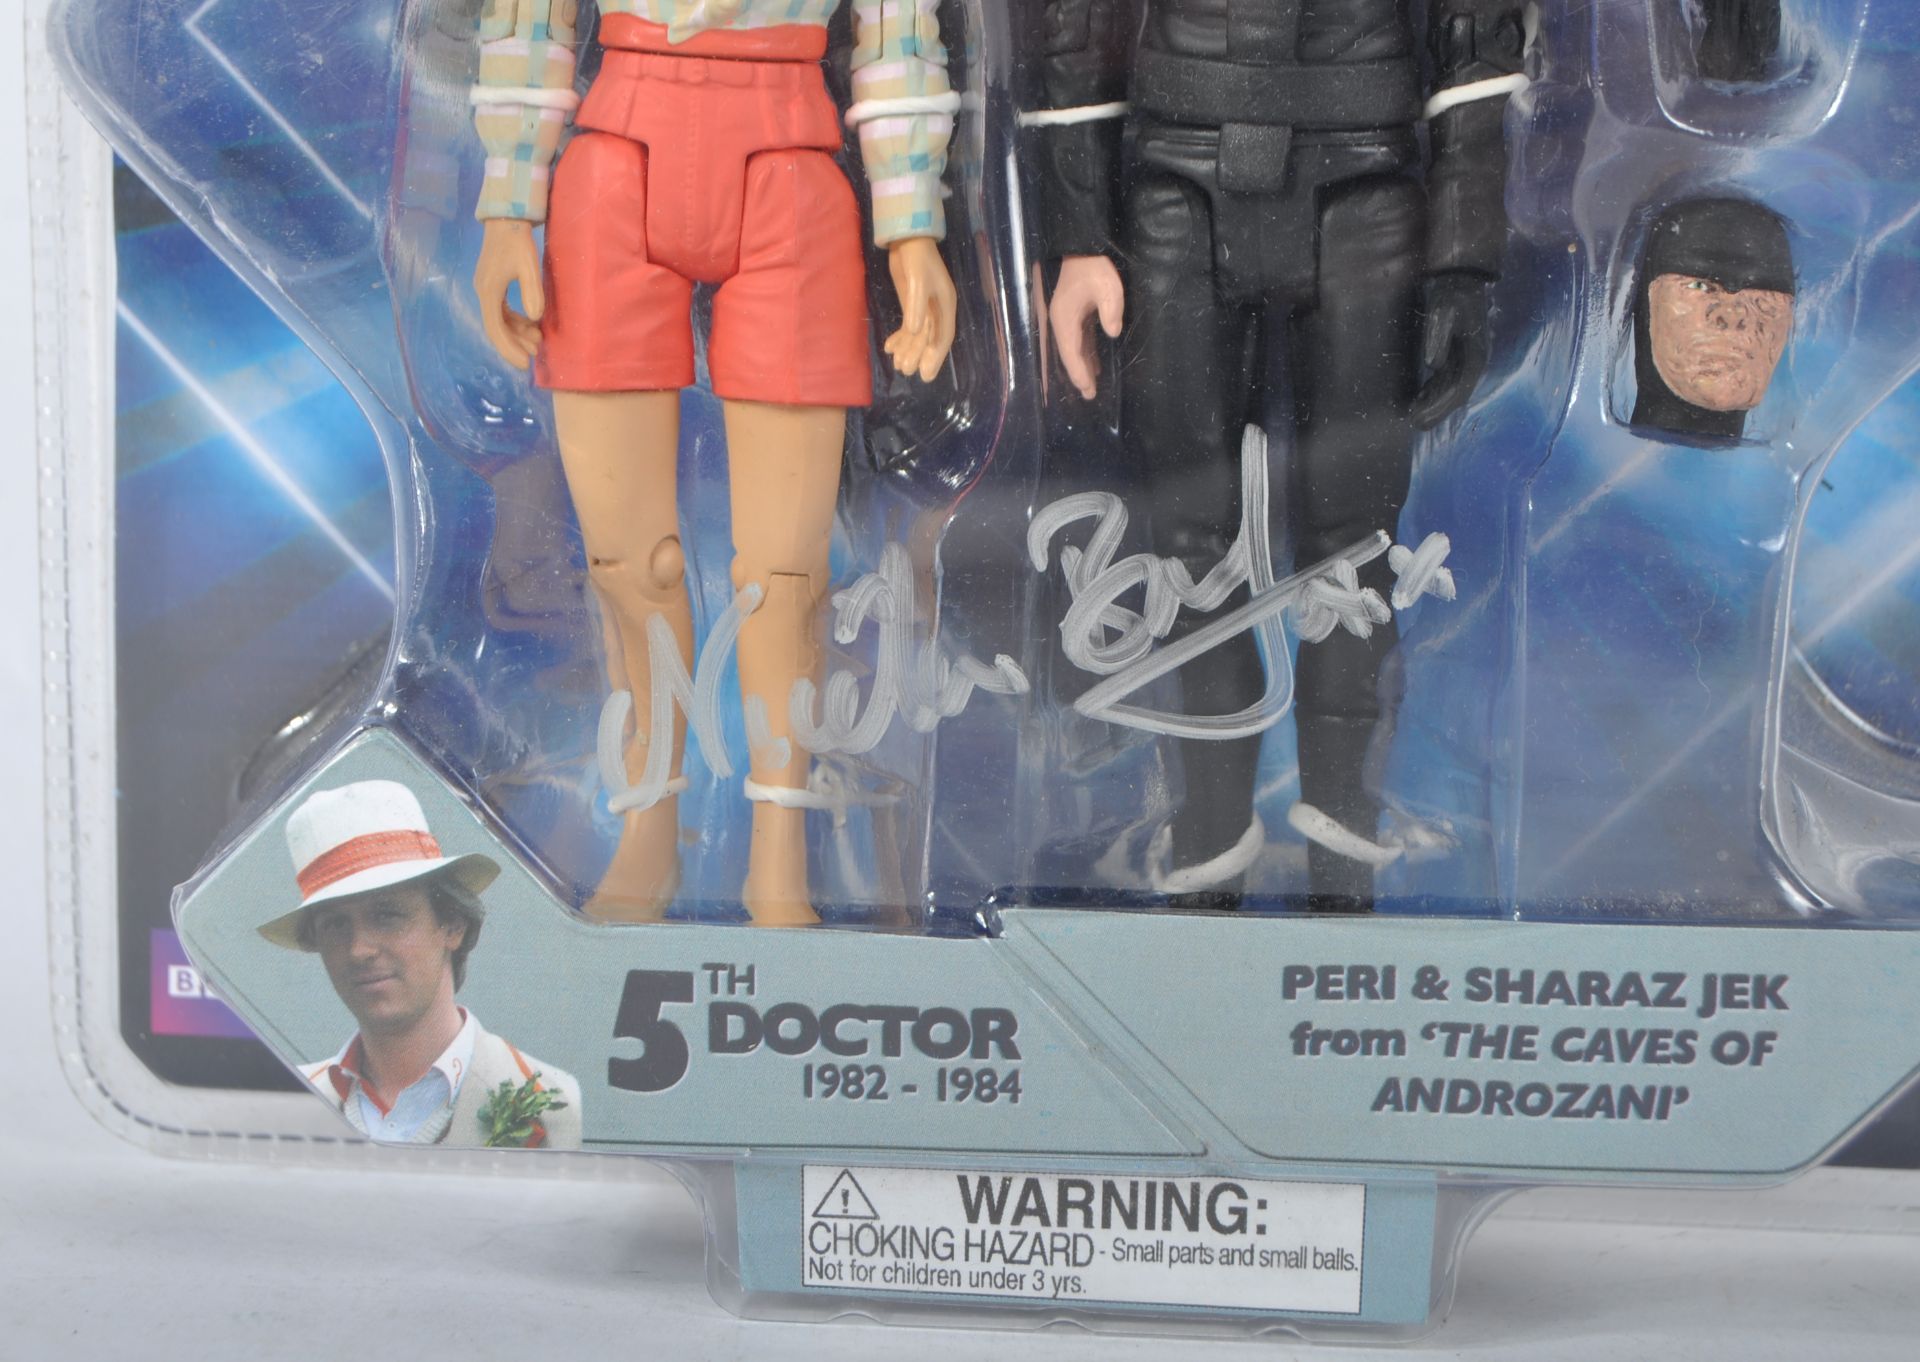 DOCTOR WHO - NICOLA BRYANT (PERI) - AUTOGRAPHED ACTION FIGURE - Image 2 of 4